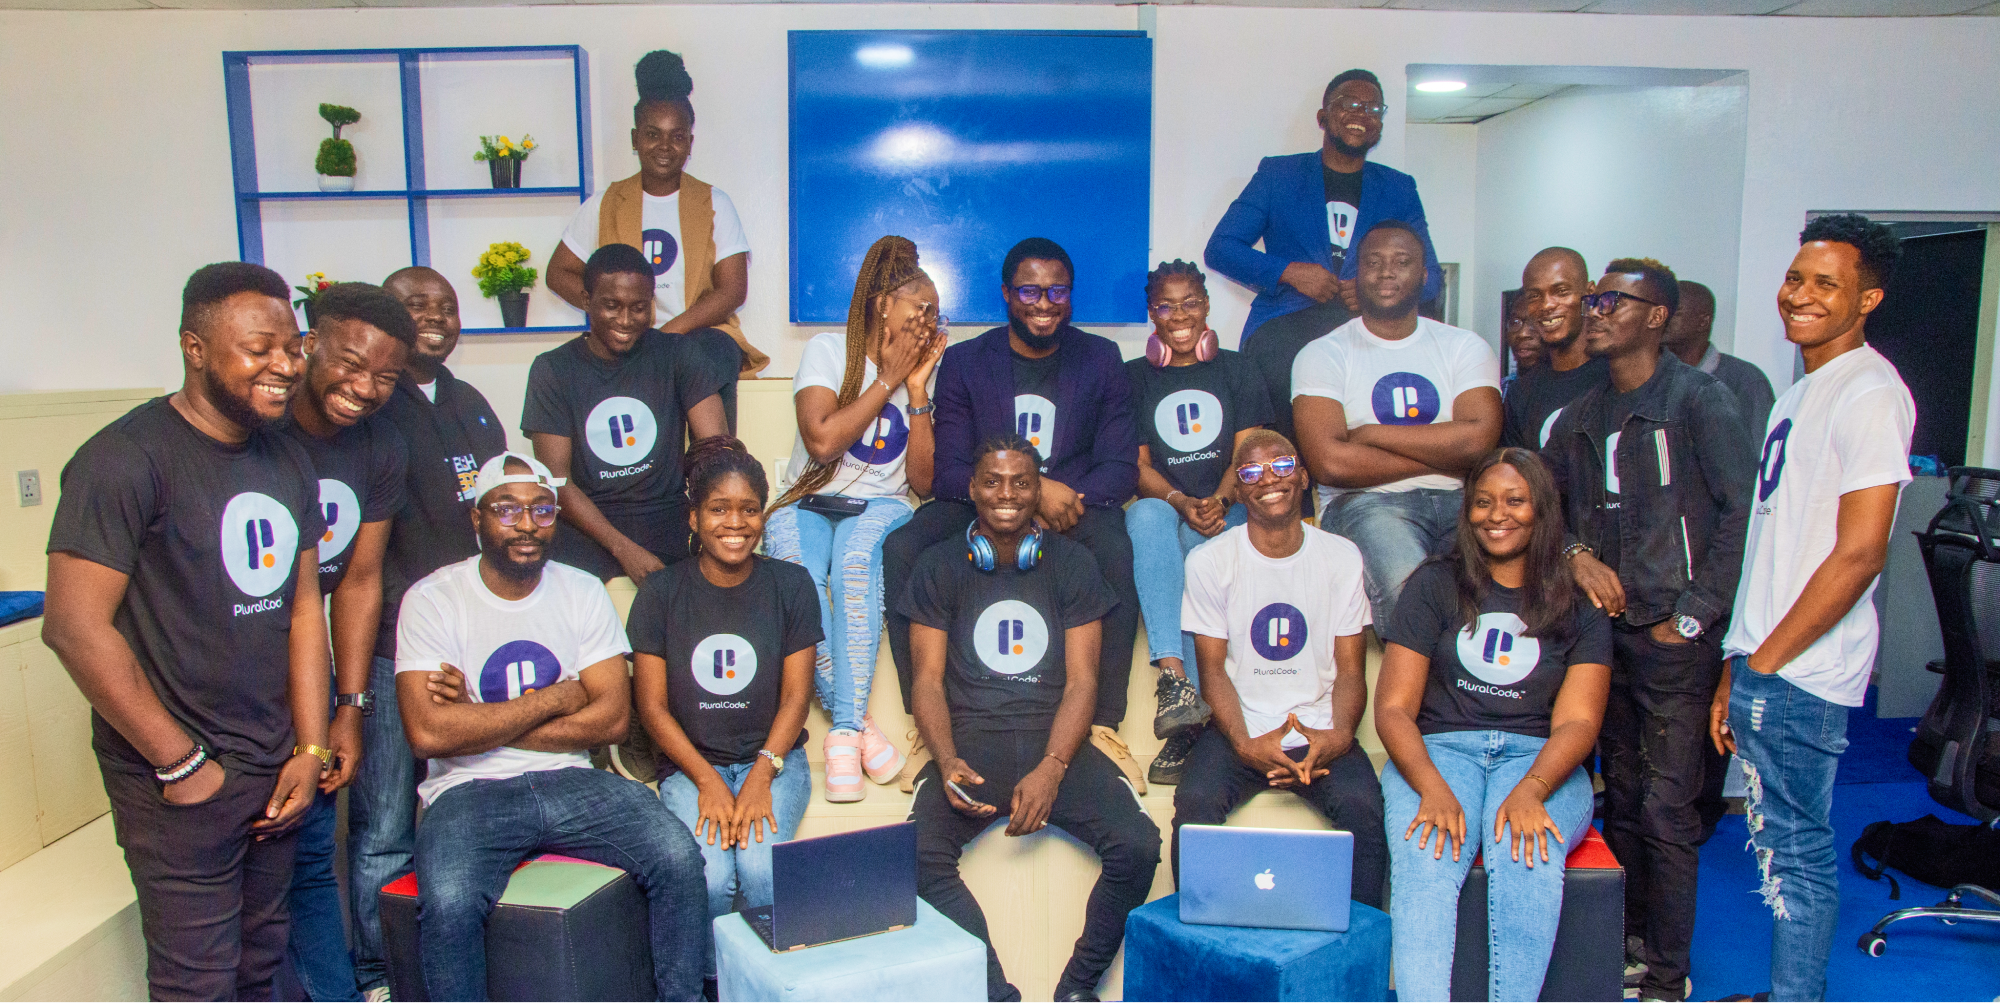 Nigerian Ed-Tech Company, Pluralcode, is on a mission to build Africa's largest tech school